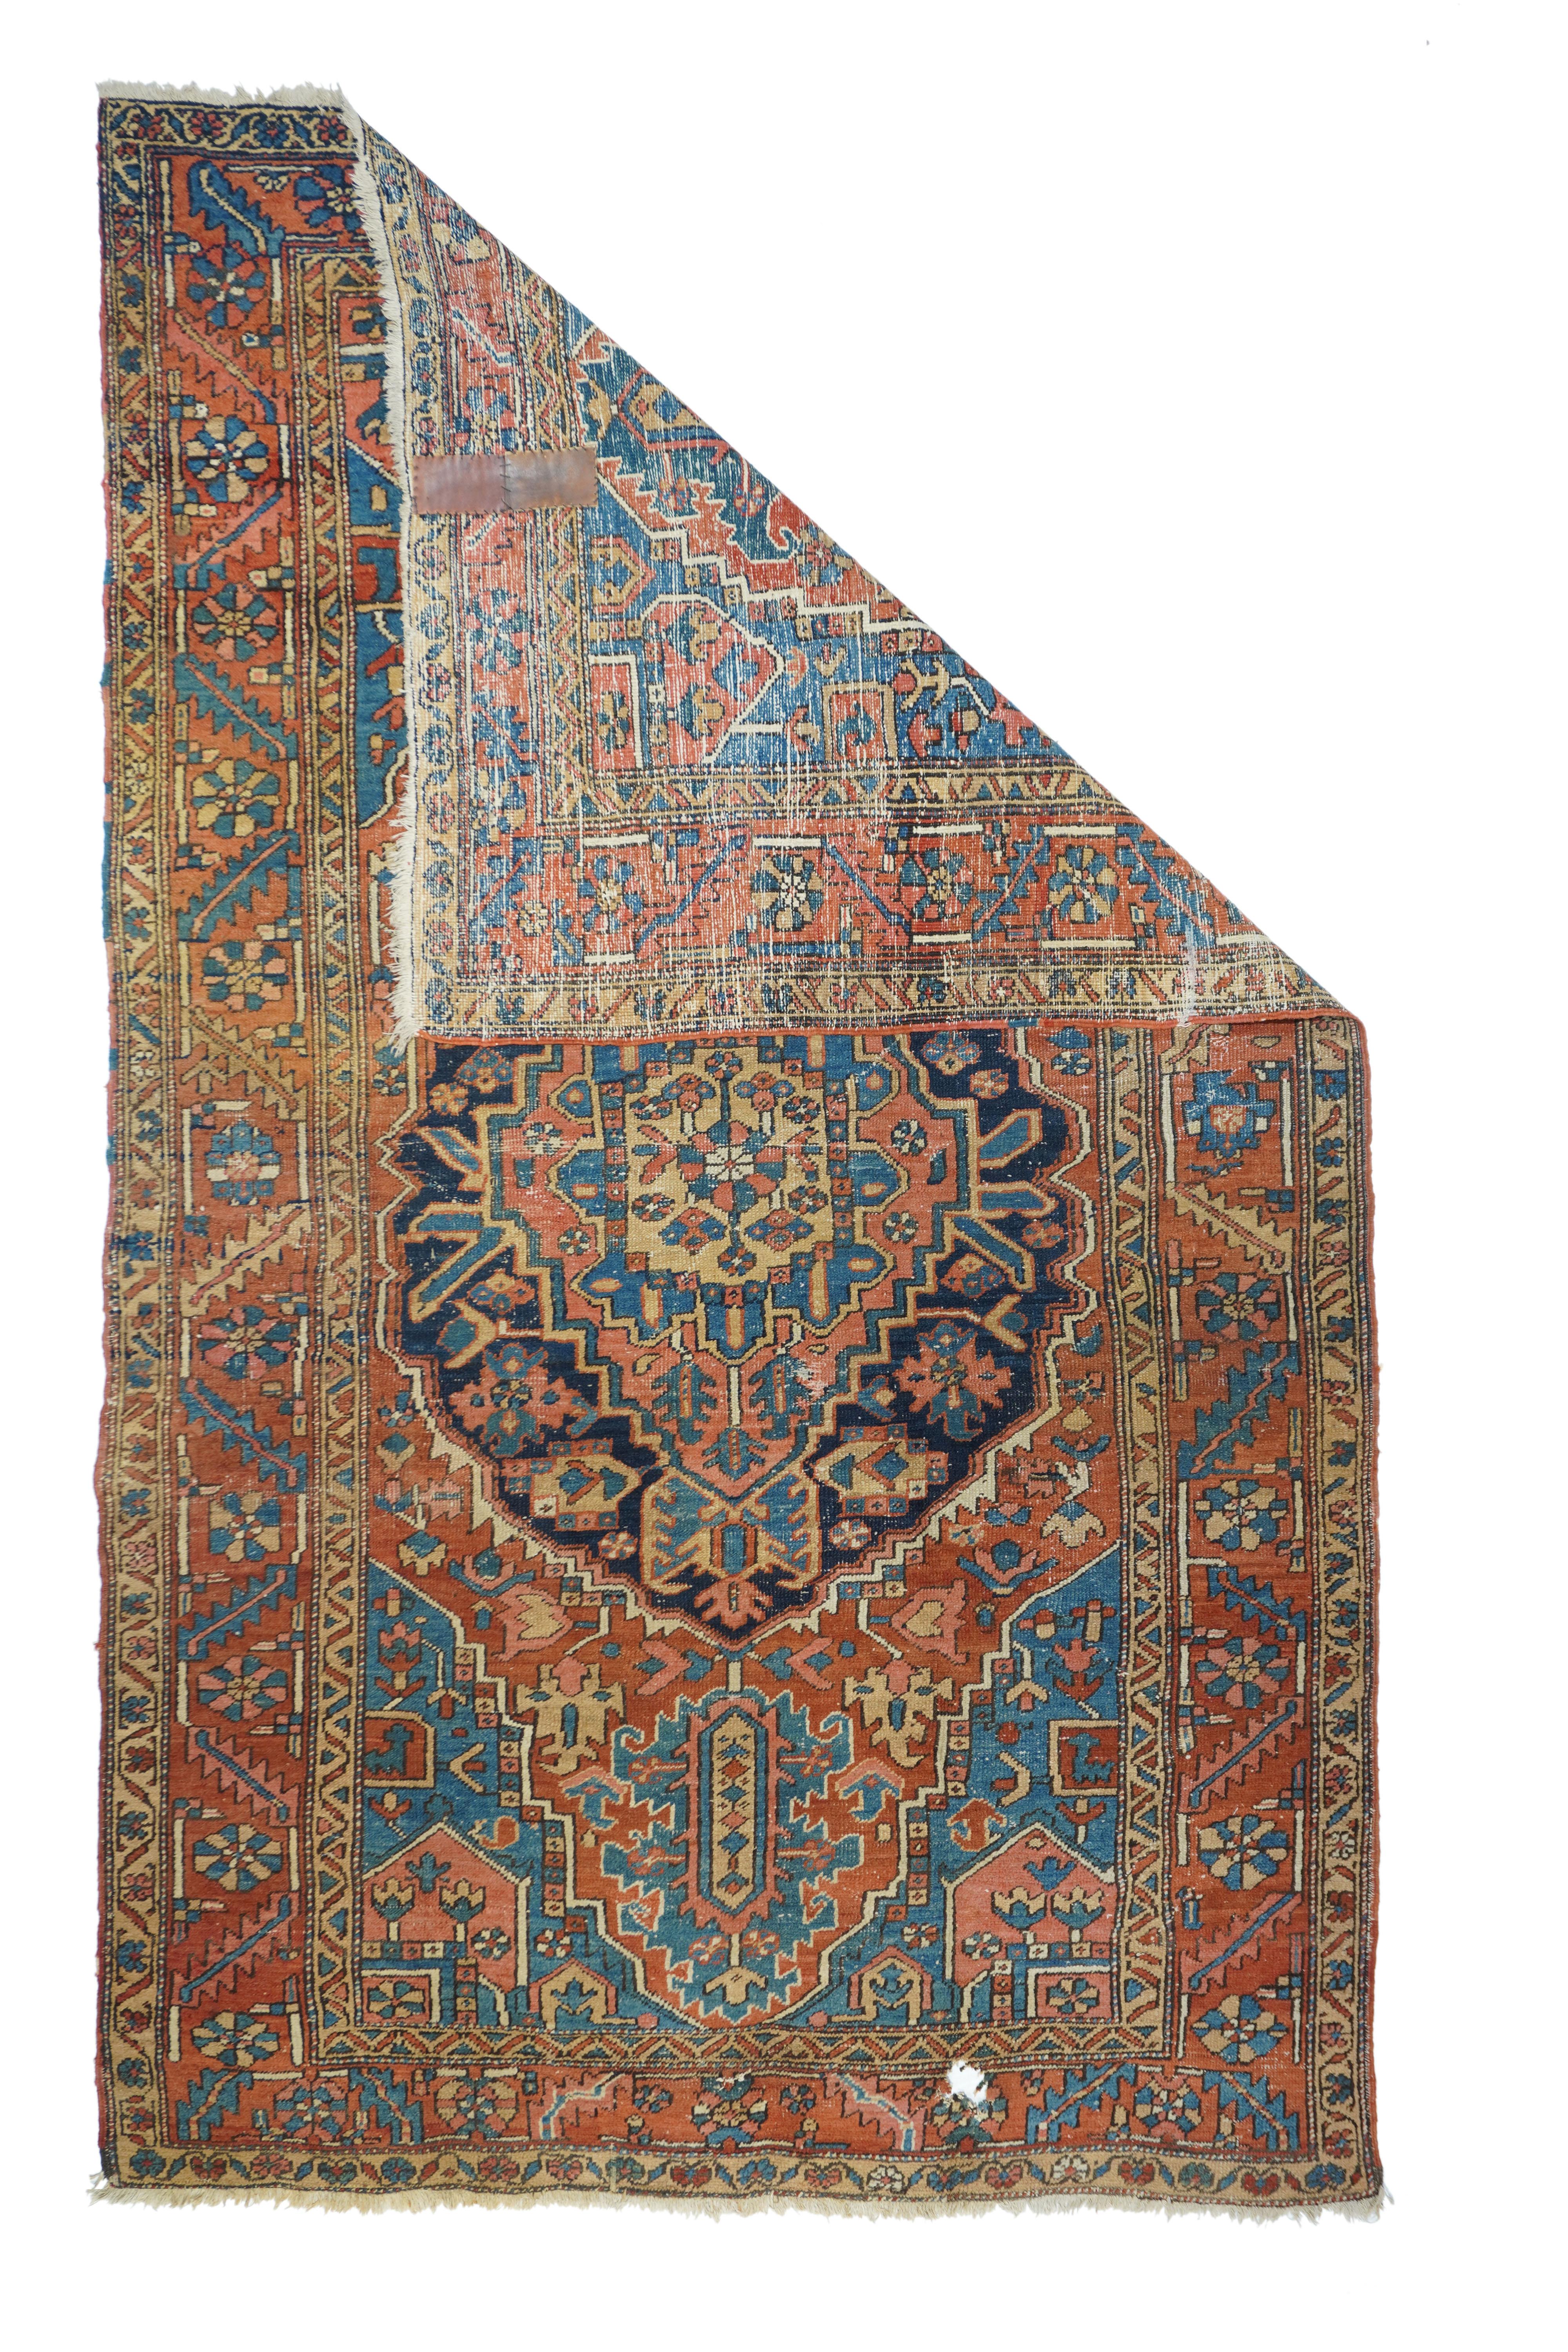 Antique Heriz rug 6'1'' x 10'2''. The jaunty, irregular oval navy medallion encloses a rose and yellow layered sub-medallion. Giant medium blue ragged palmette pendants. Light blue and rose corners. Rust red border with rosettes and slanted serrated